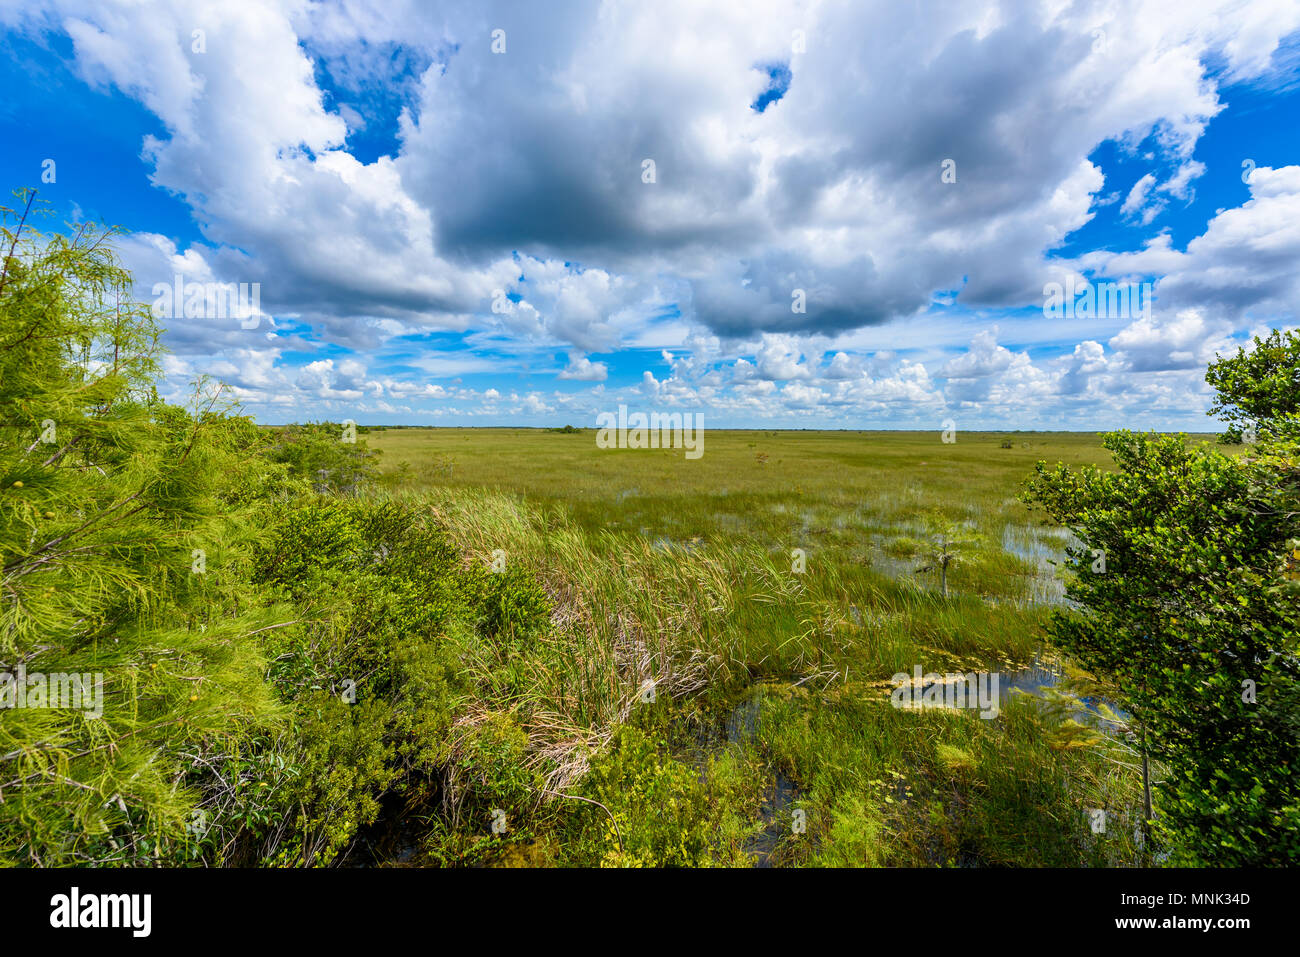 Pa-Hay-Okee Lookout Tower and trail of the Everglades National Park. Boardwalks in the swamp. Florida, USA. Stock Photo